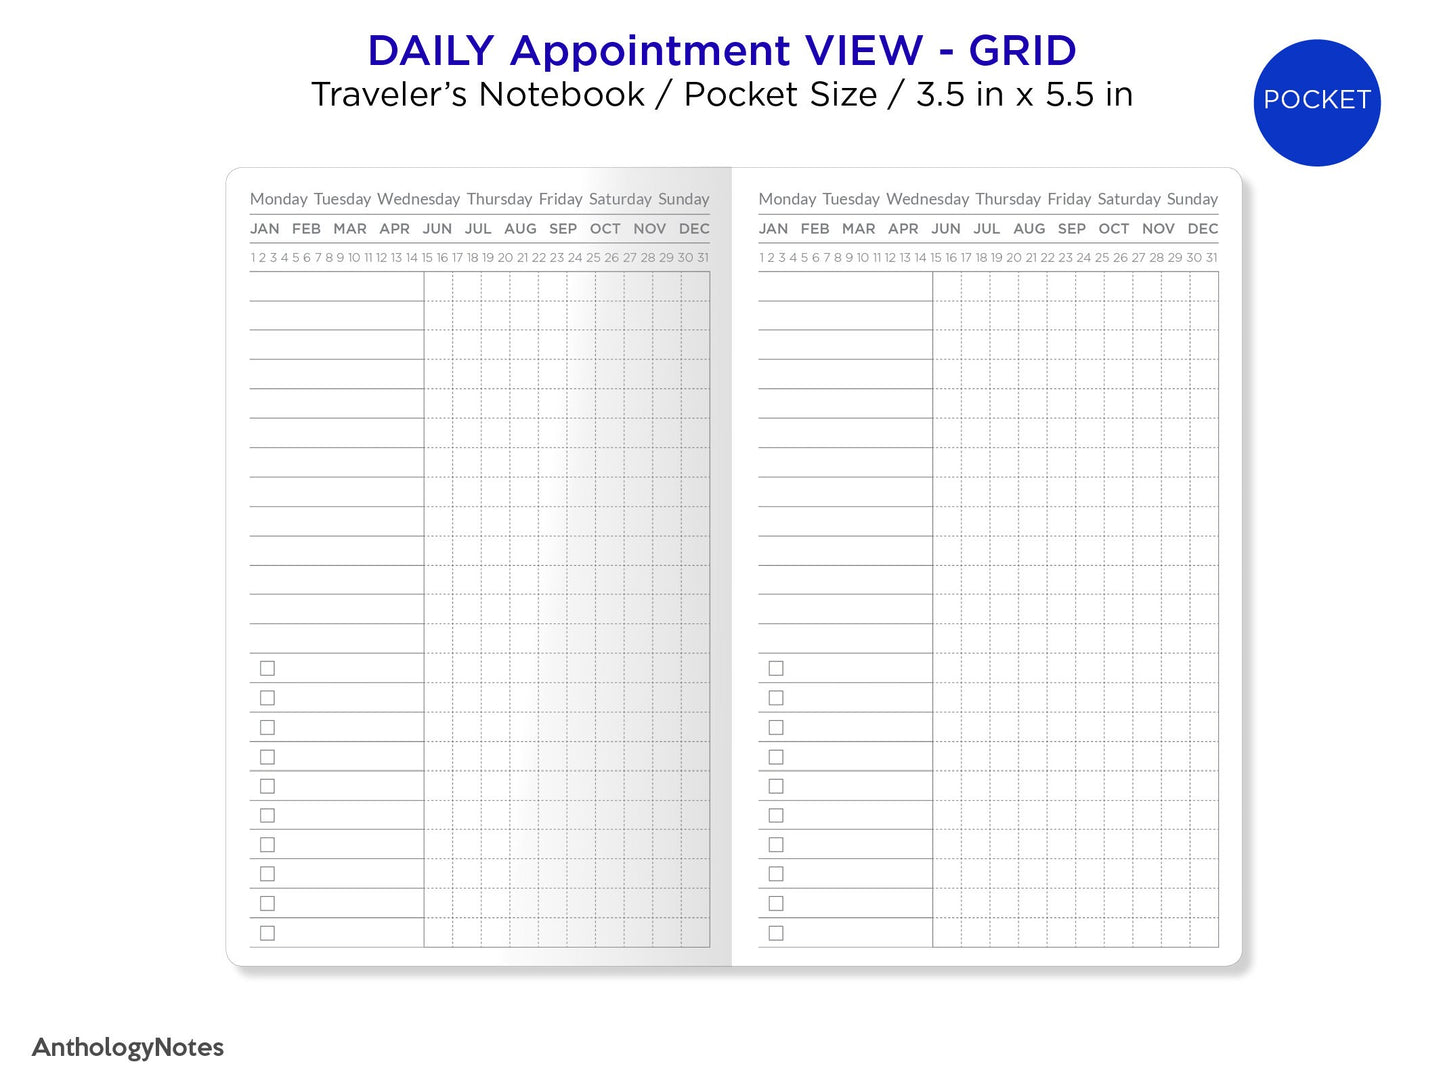 TN POCKET Daily GRID Appointment Schedule Printable Traveler's Notebook Insert